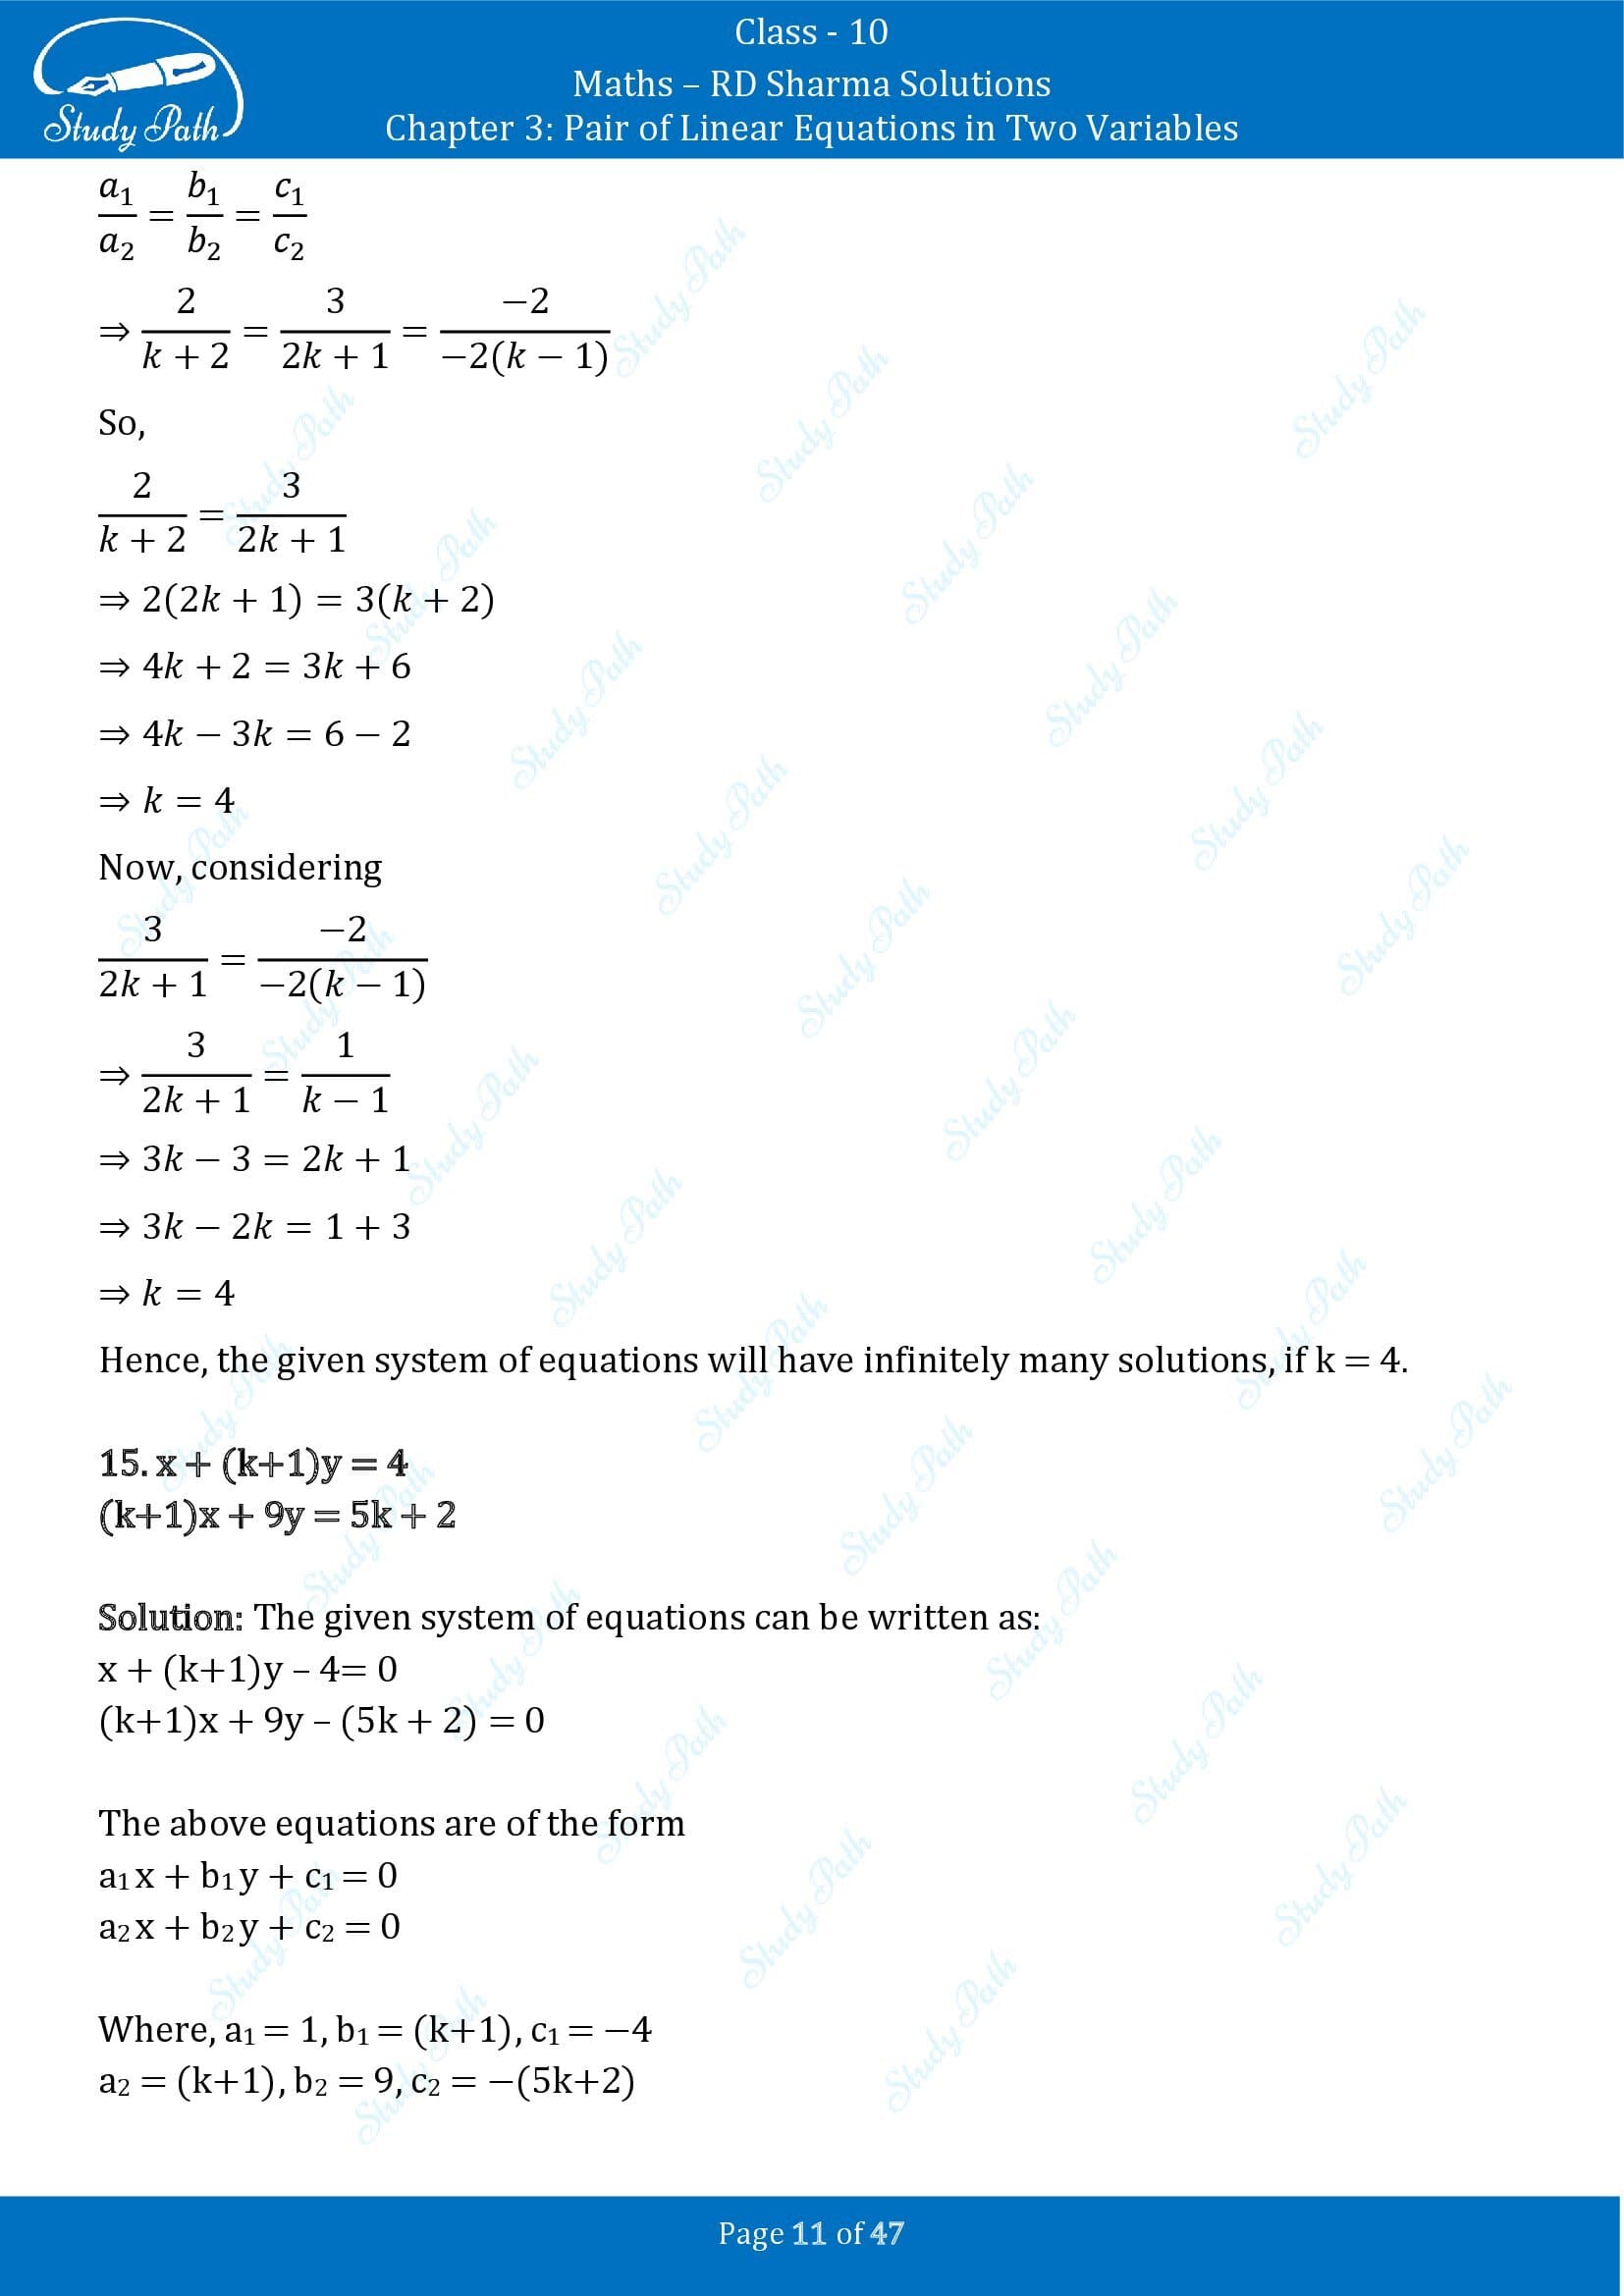 RD Sharma Solutions Class 10 Chapter 3 Pair of Linear Equations in Two Variables Exercise 3.5 00011